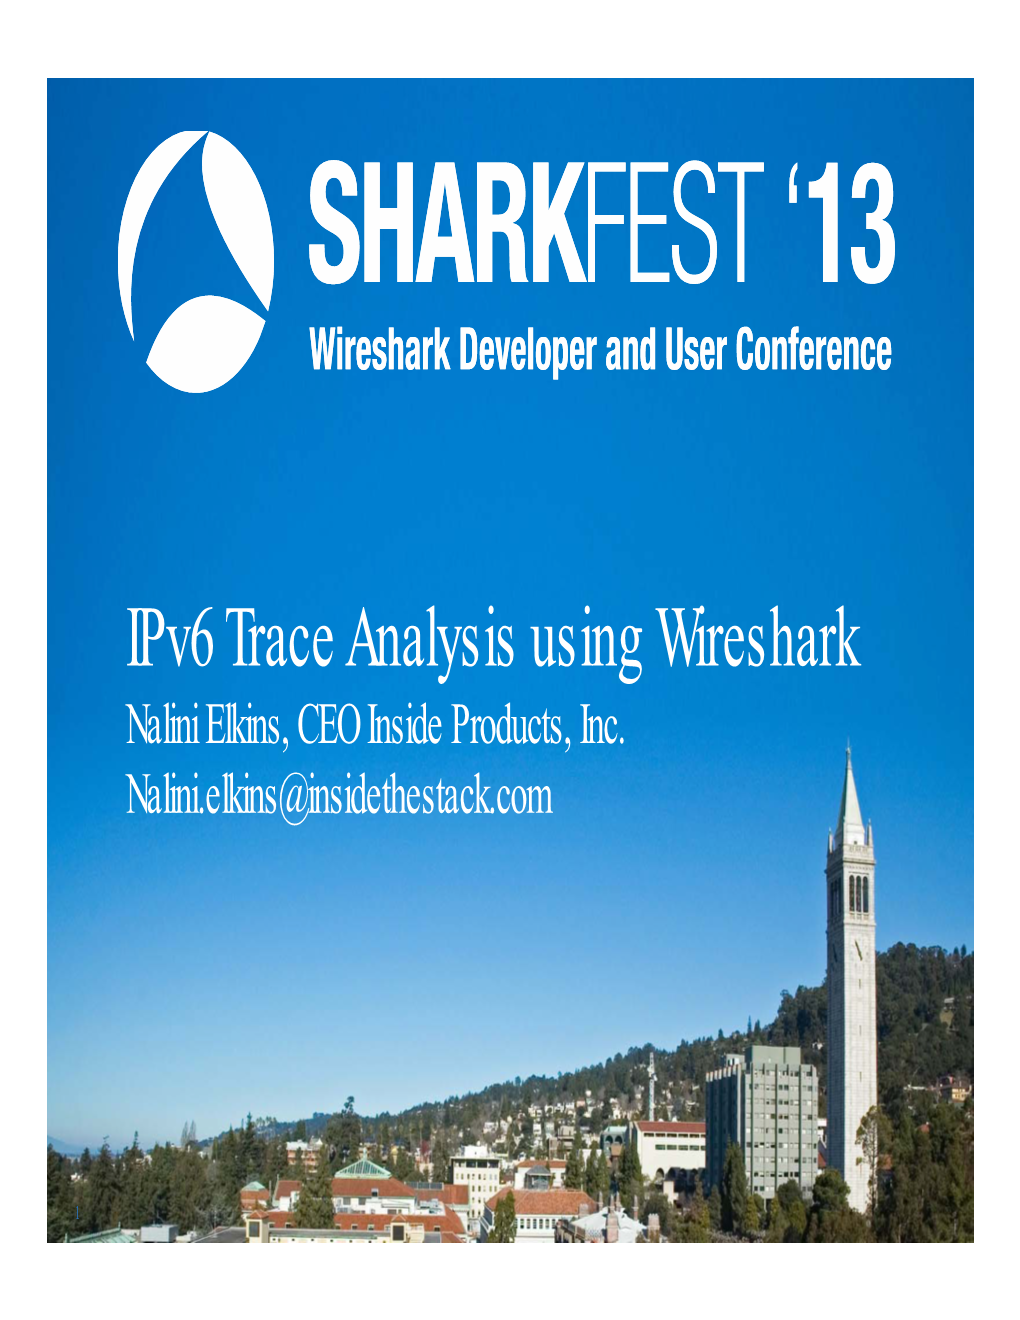 Ipv6 Trace Analysis Using Wireshark Nalini Elkins, CEO Inside Products, Inc